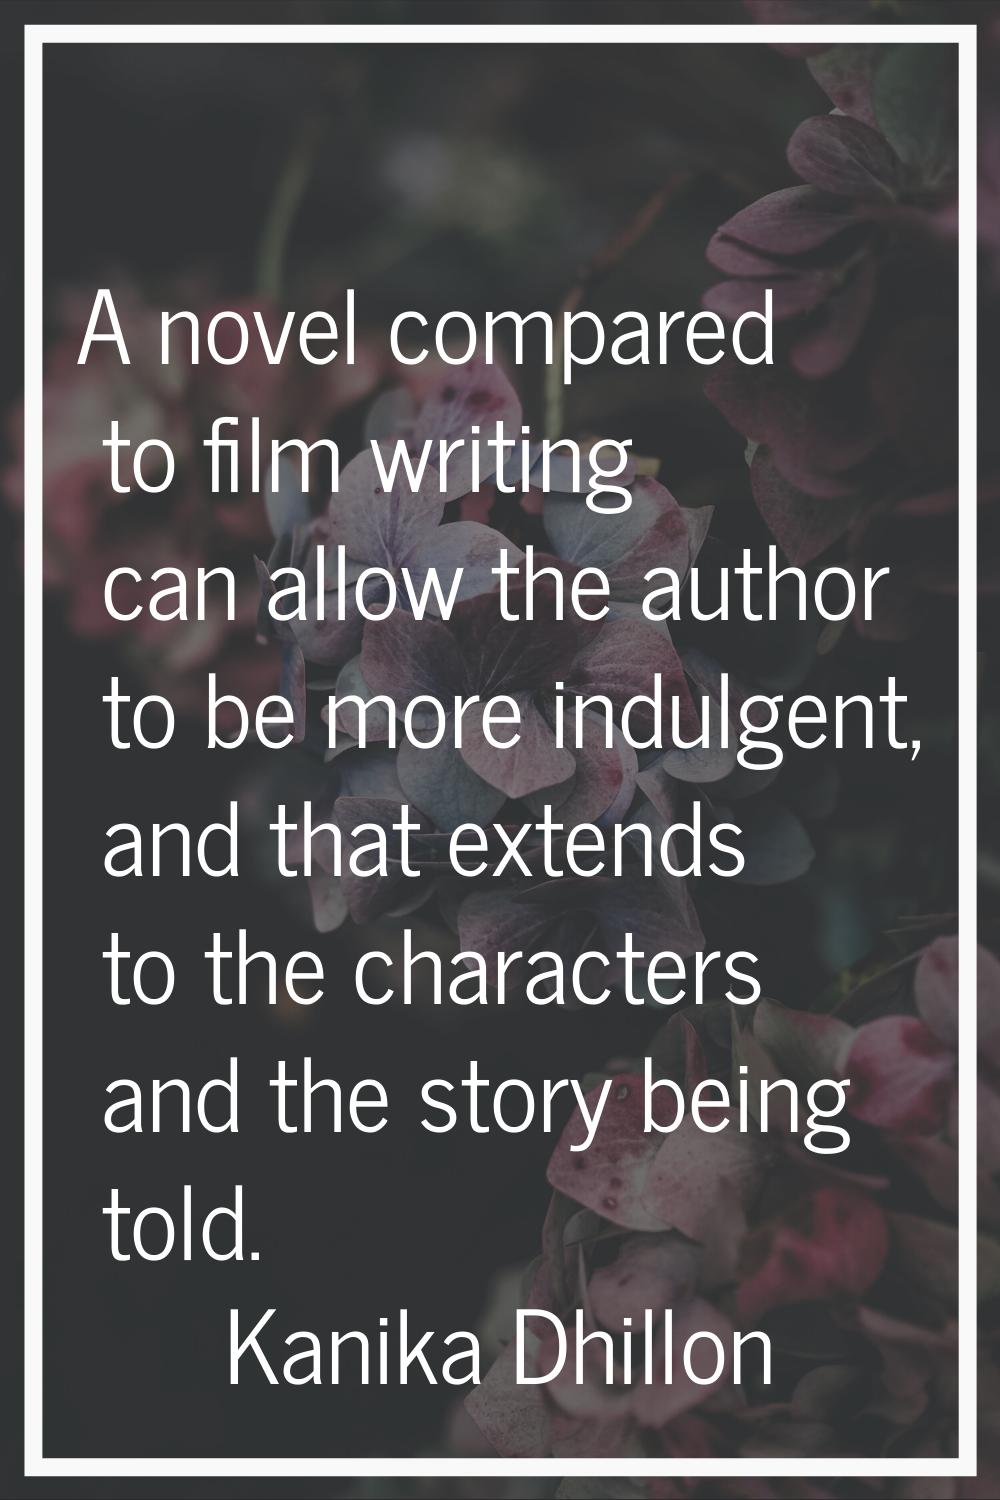 A novel compared to film writing can allow the author to be more indulgent, and that extends to the